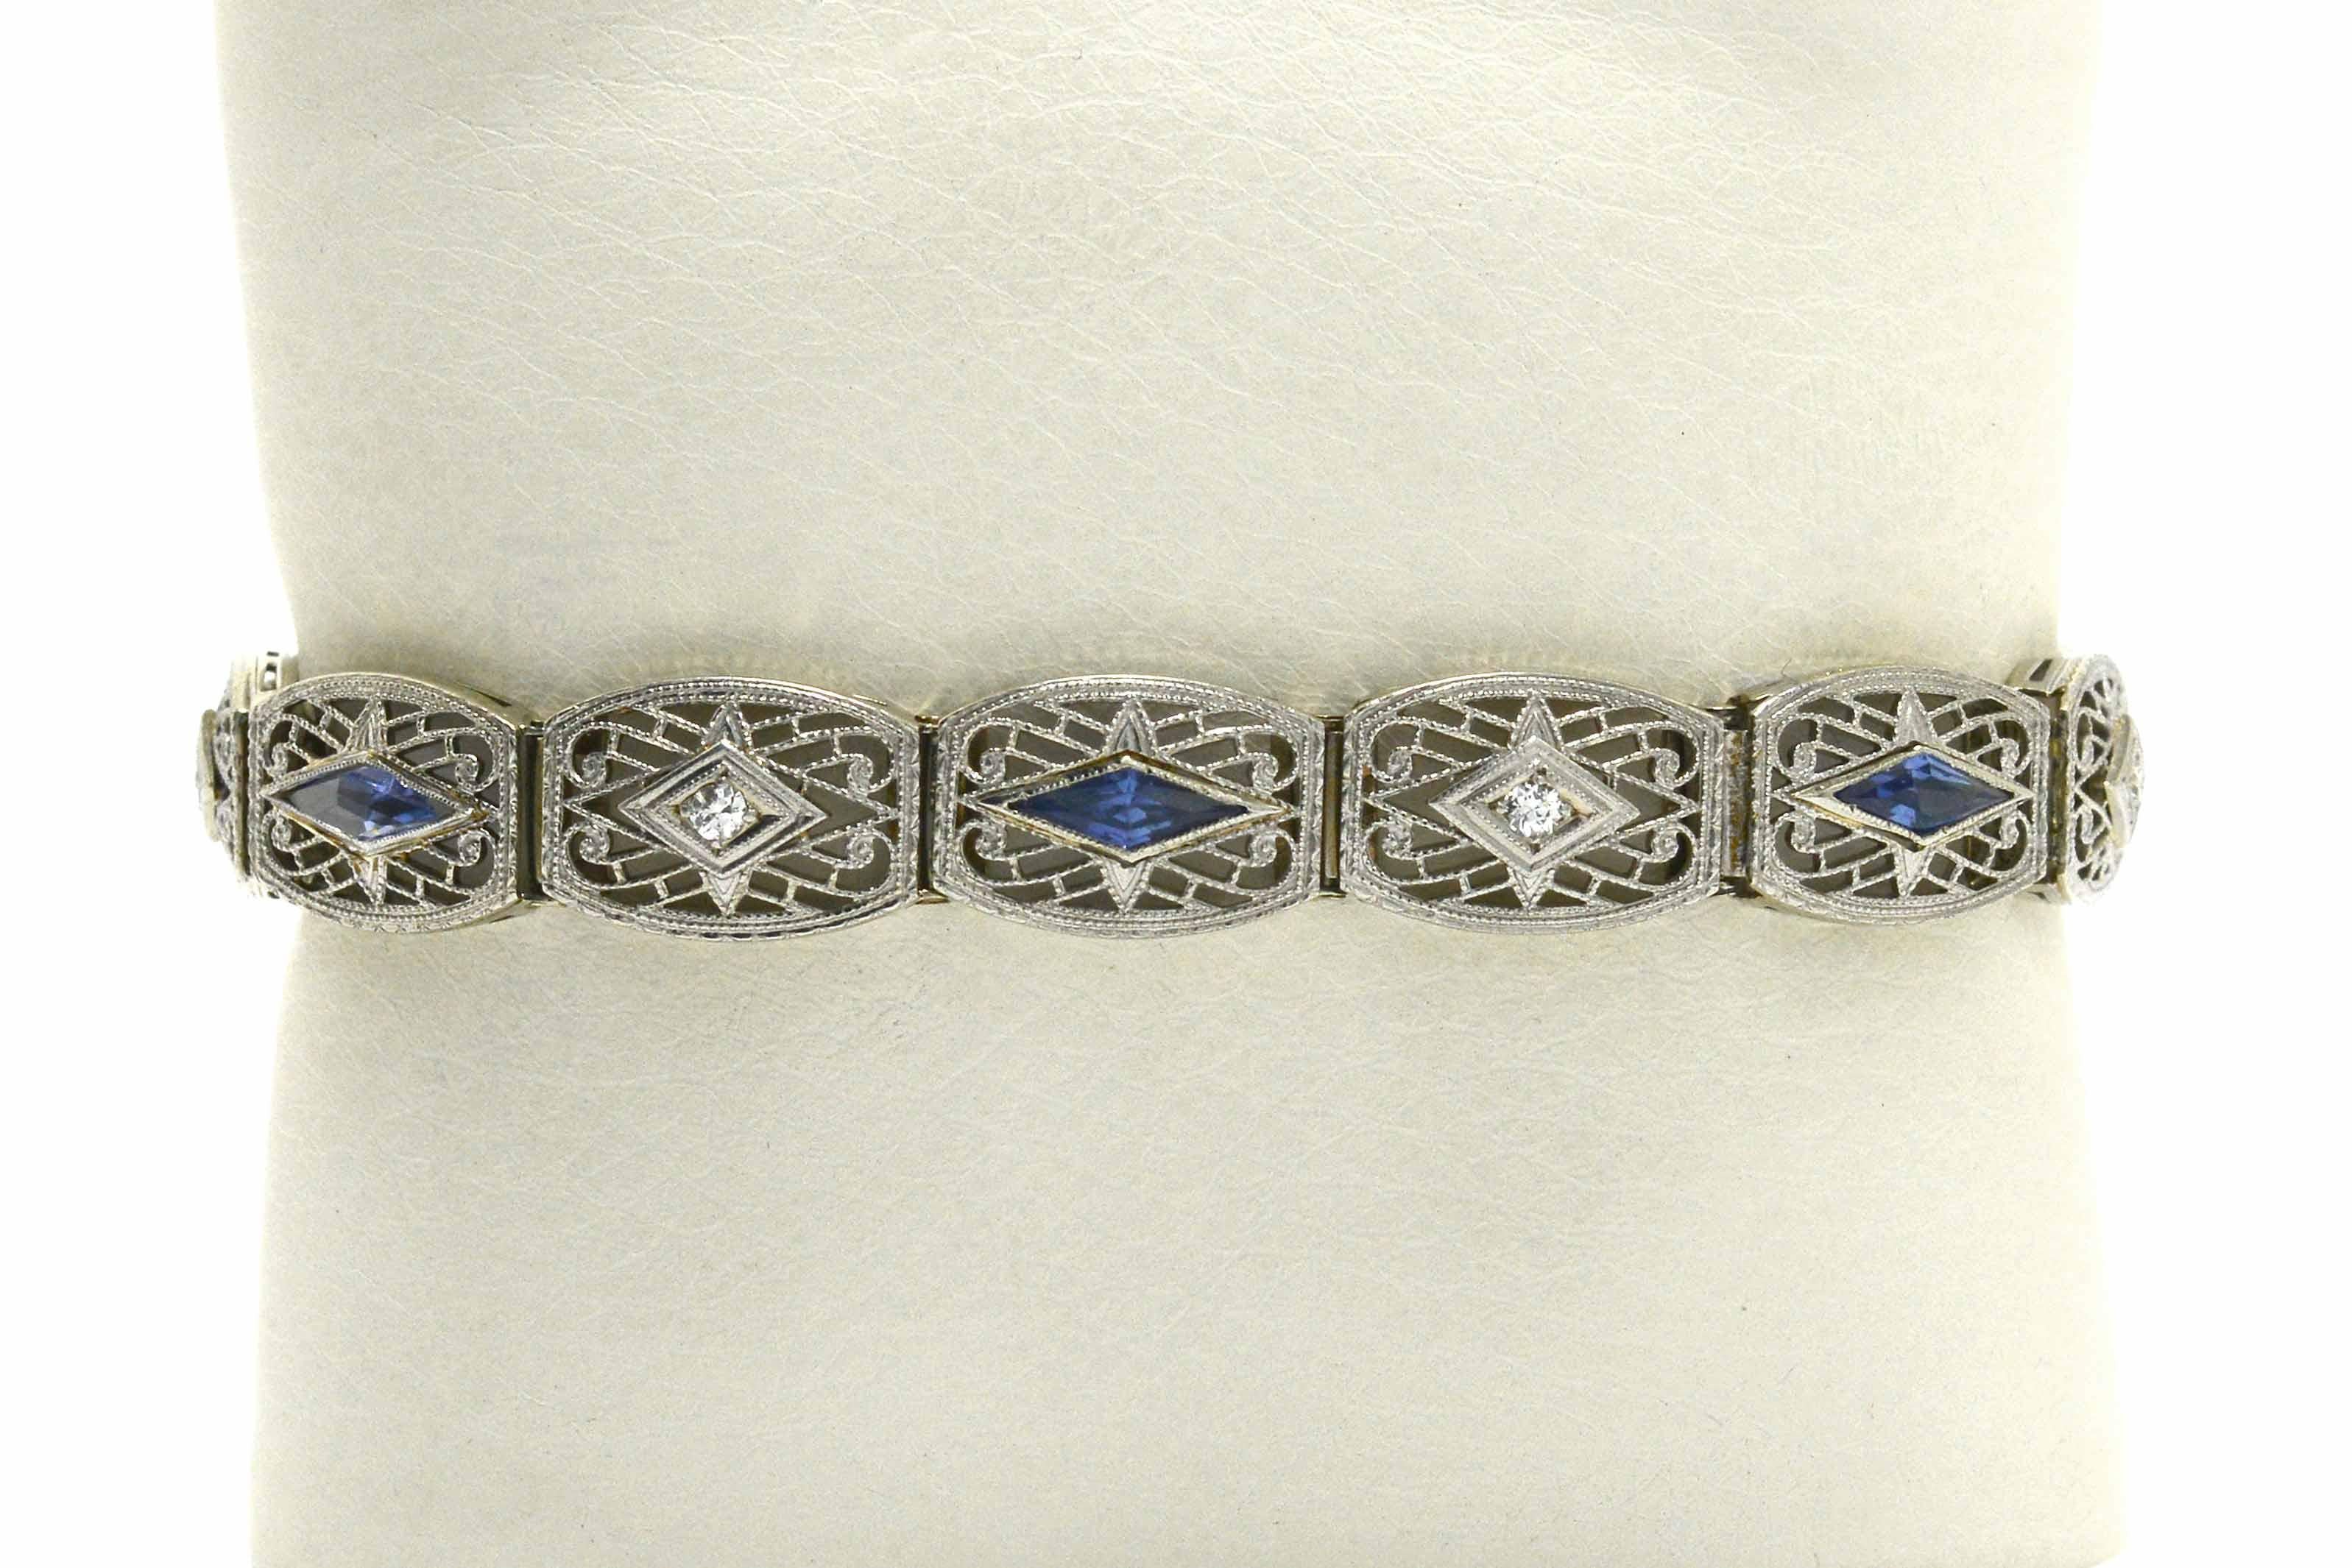 An eminently wearable Art Deco filigree diamond sapphire bracelet. Worn solo, it makes a statement and can be stacked or layered with others for a fashionable look. A Circa 1920s vintage estate heirloom, a work of wearable art from a bygone era. A